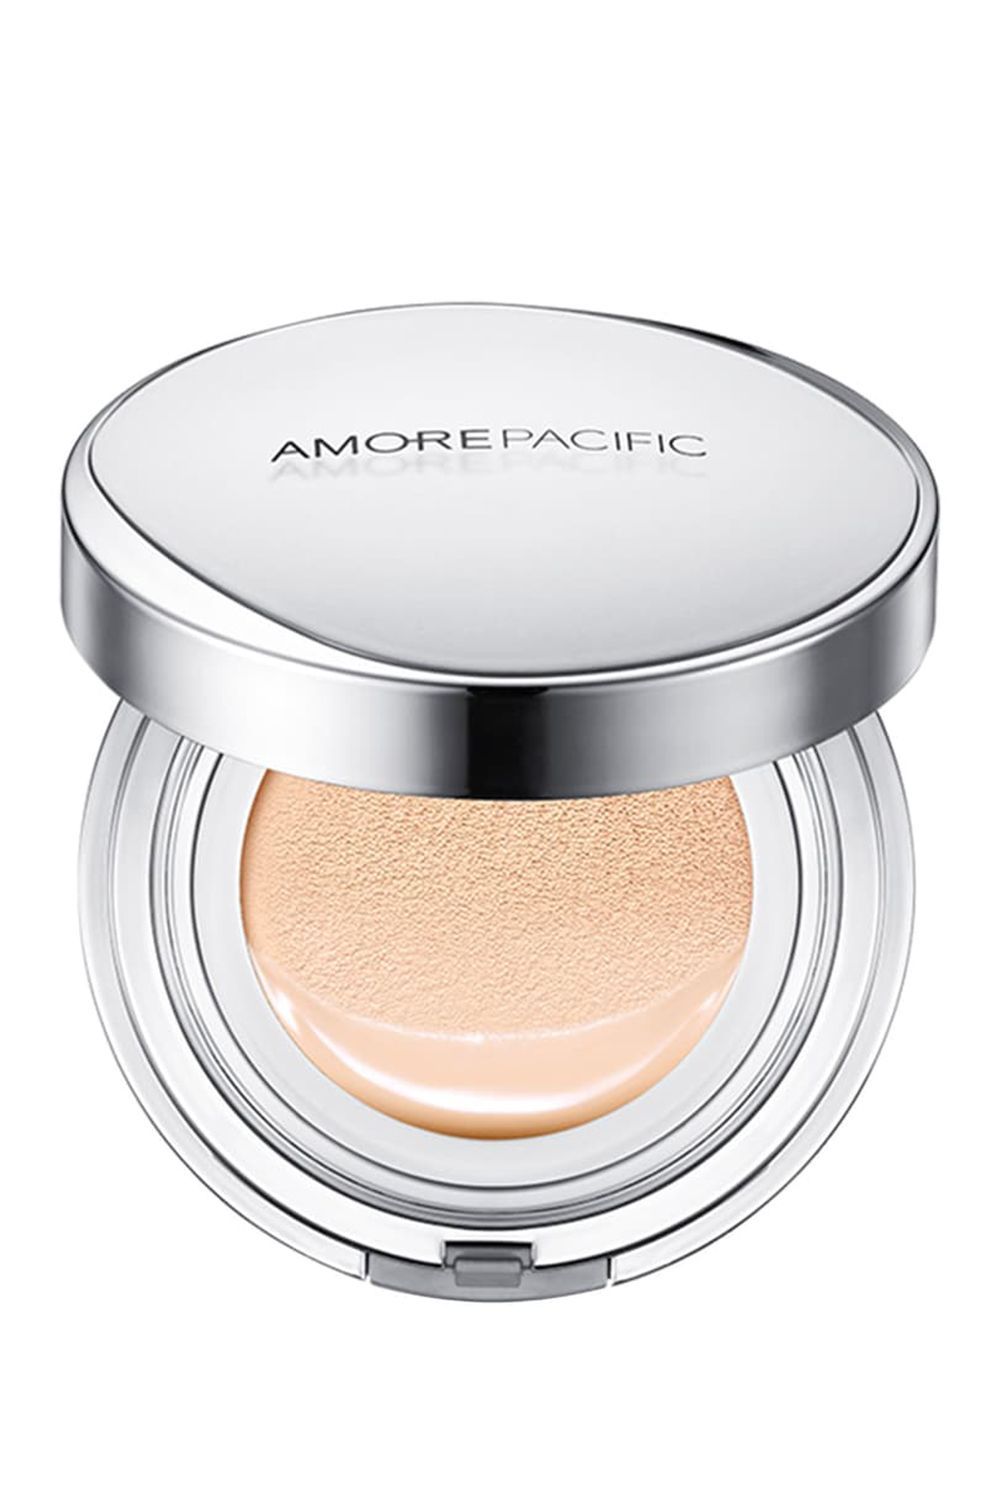 10 Best Cushion Foundation Compacts For And How To Use Them